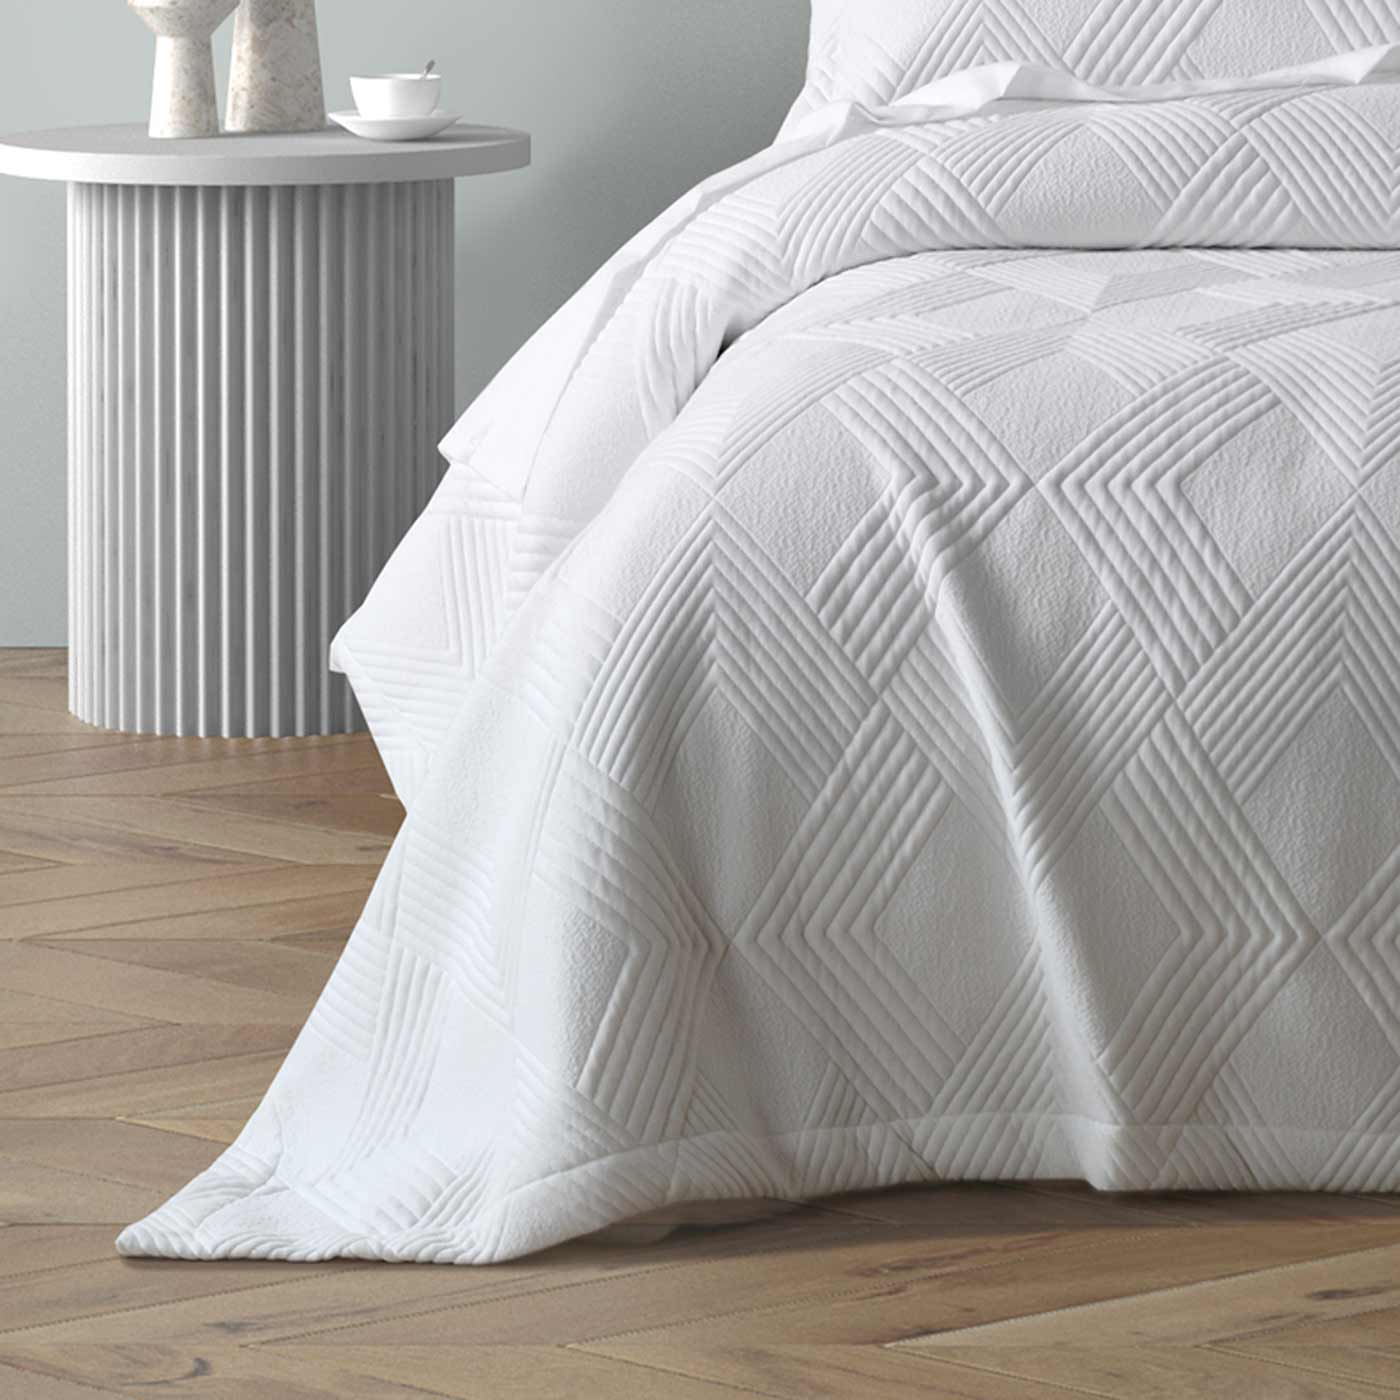 Cassiano White Jacquard Coverlet Set By Bianca